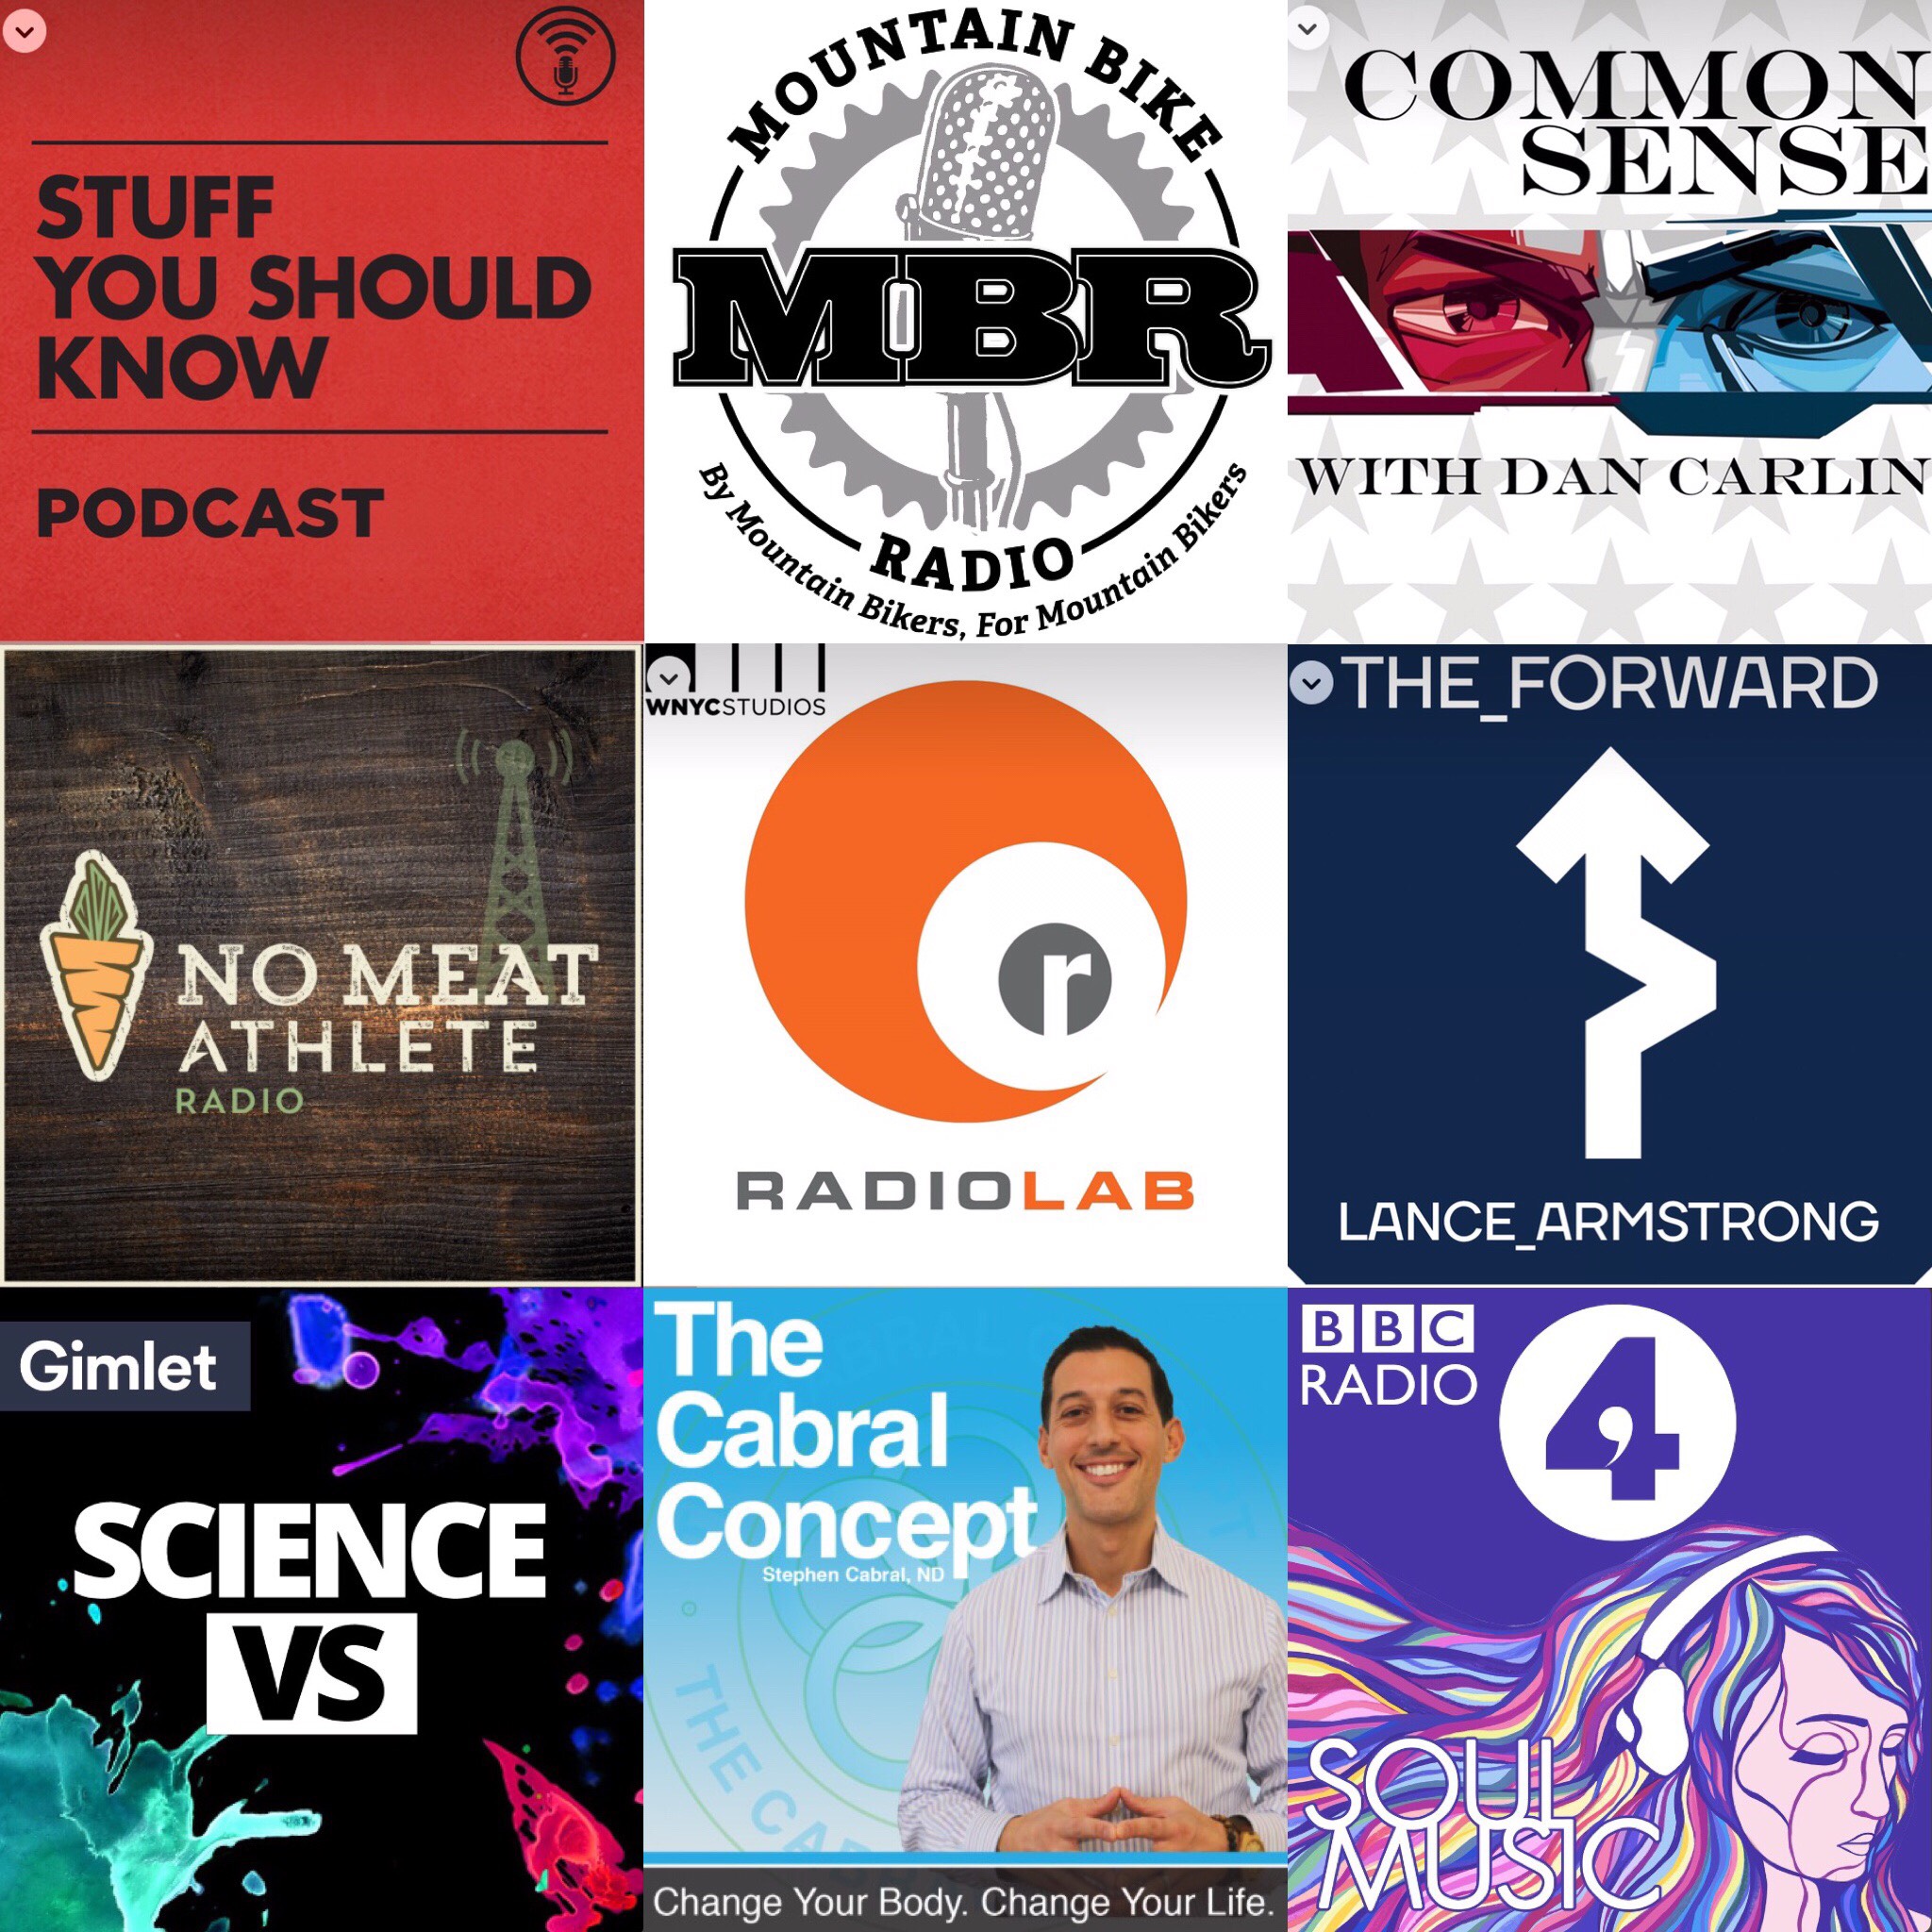 #Trypod – 9 podcasts we think are worth listening to